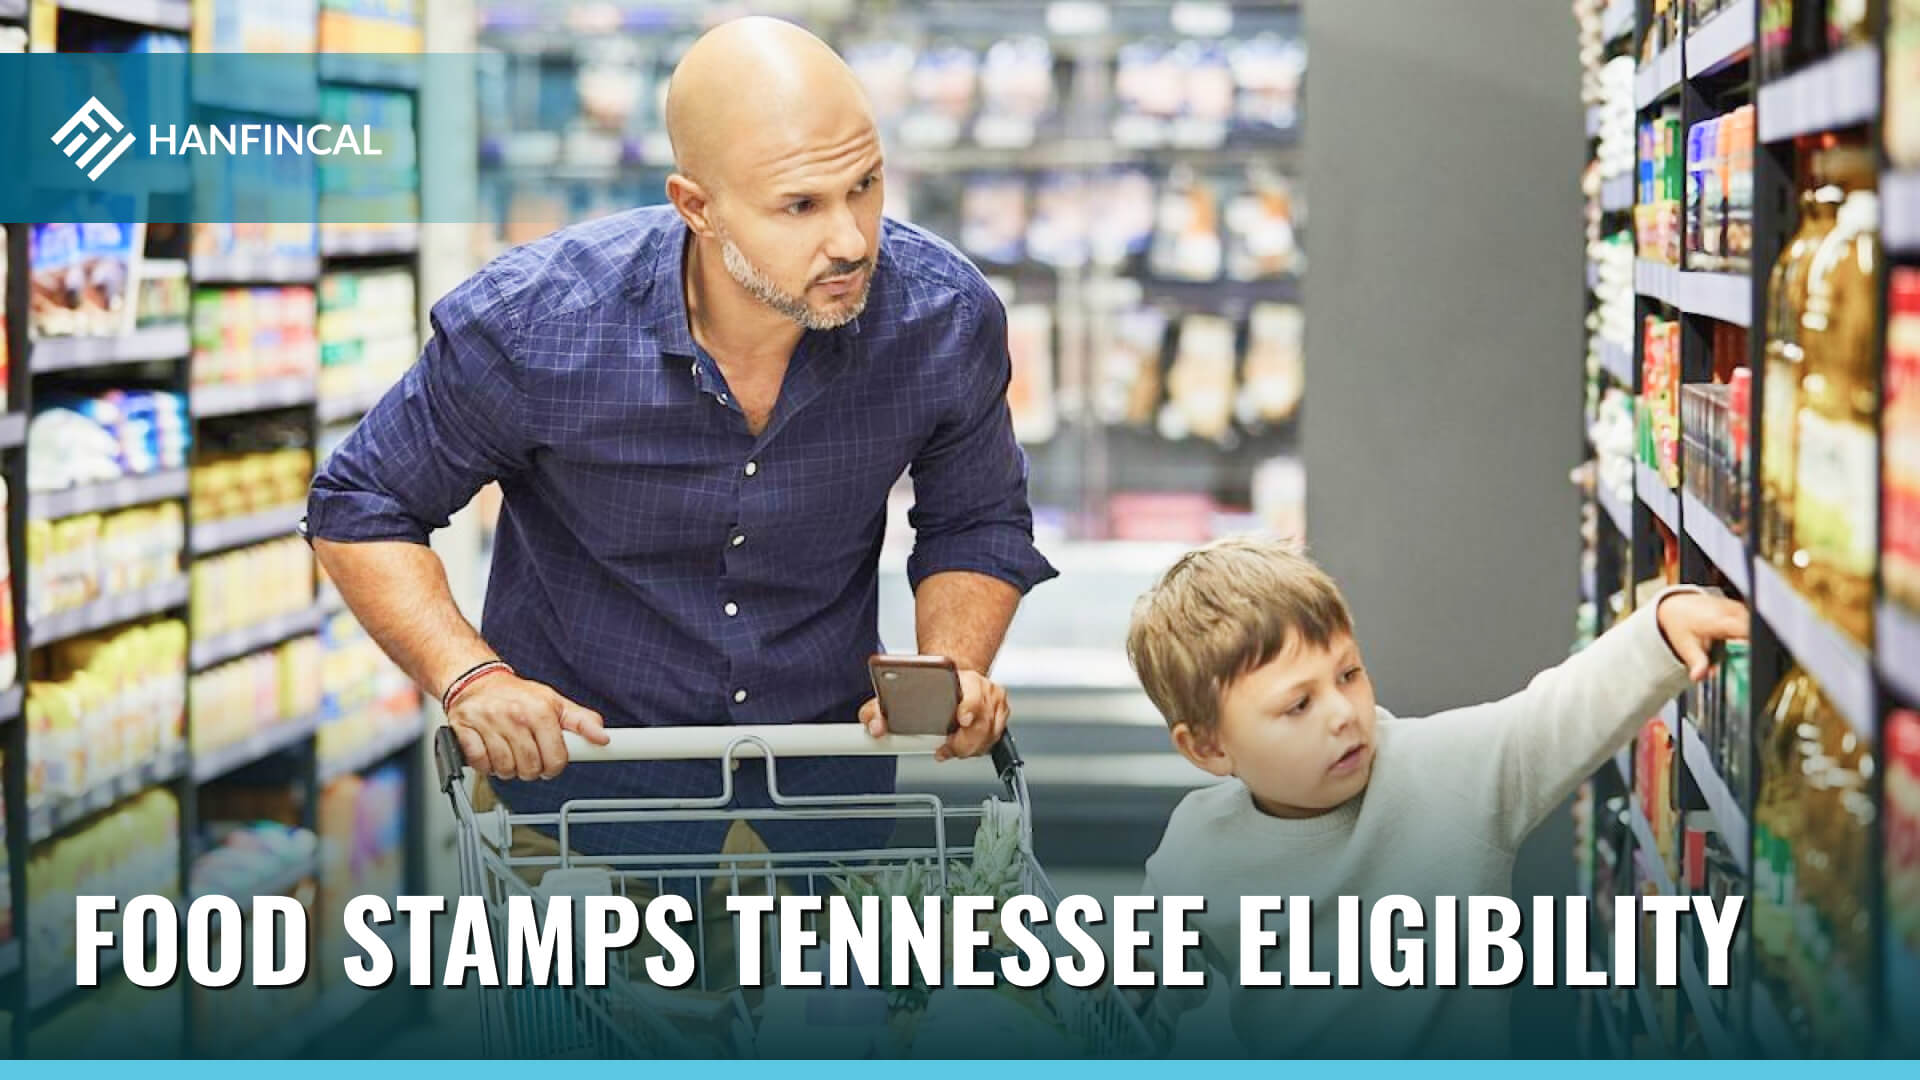 How To Apply For Food Stamps In Tennessee